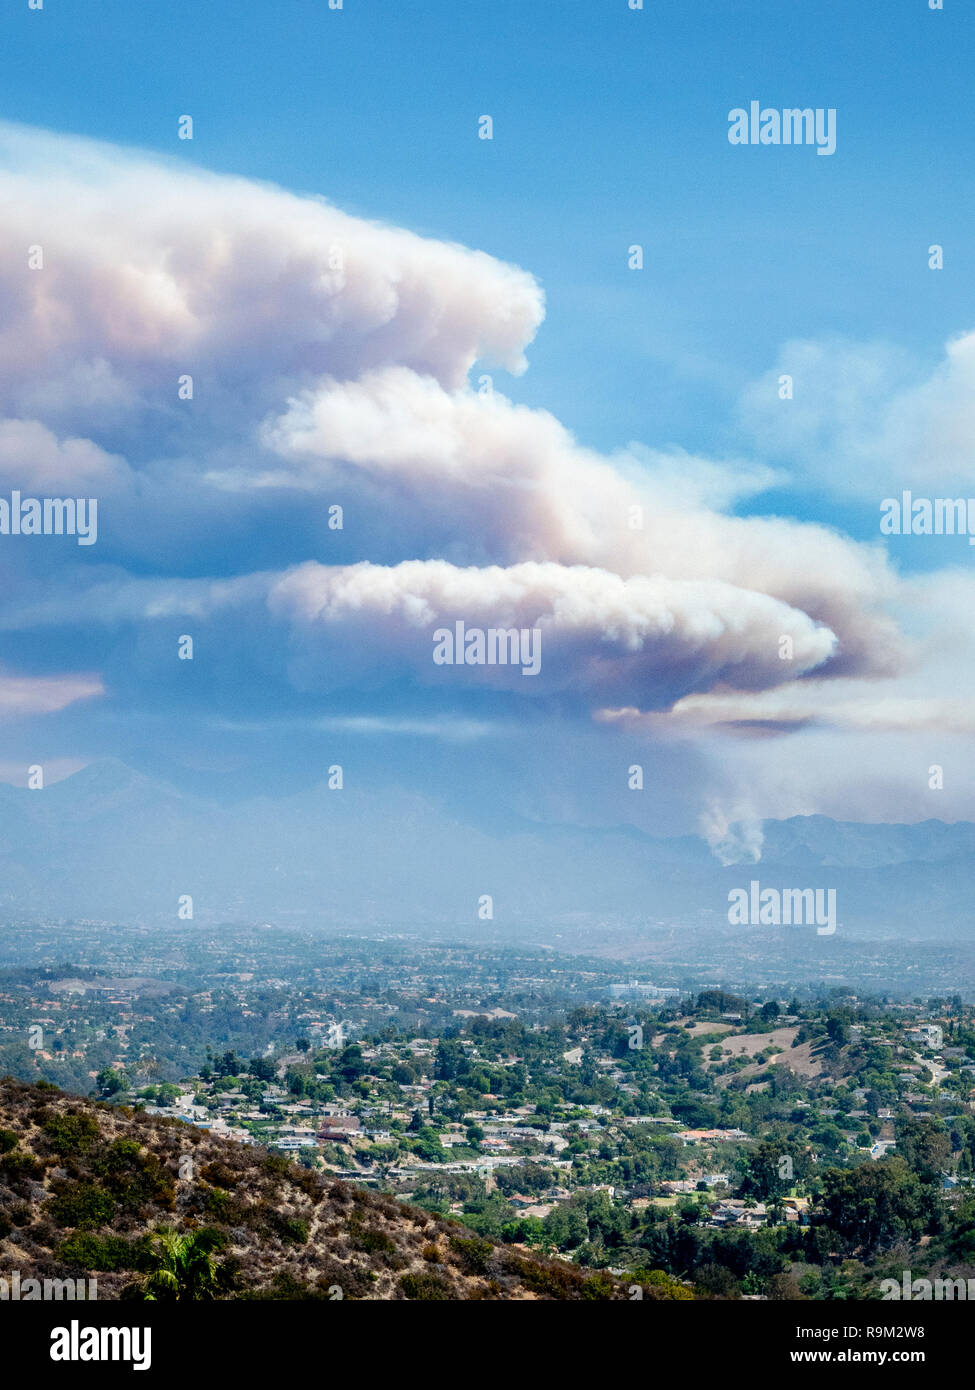 Clouds of smoke from a brush fire spread over a mountain in suburban Laguna Niguel, CA. Stock Photo